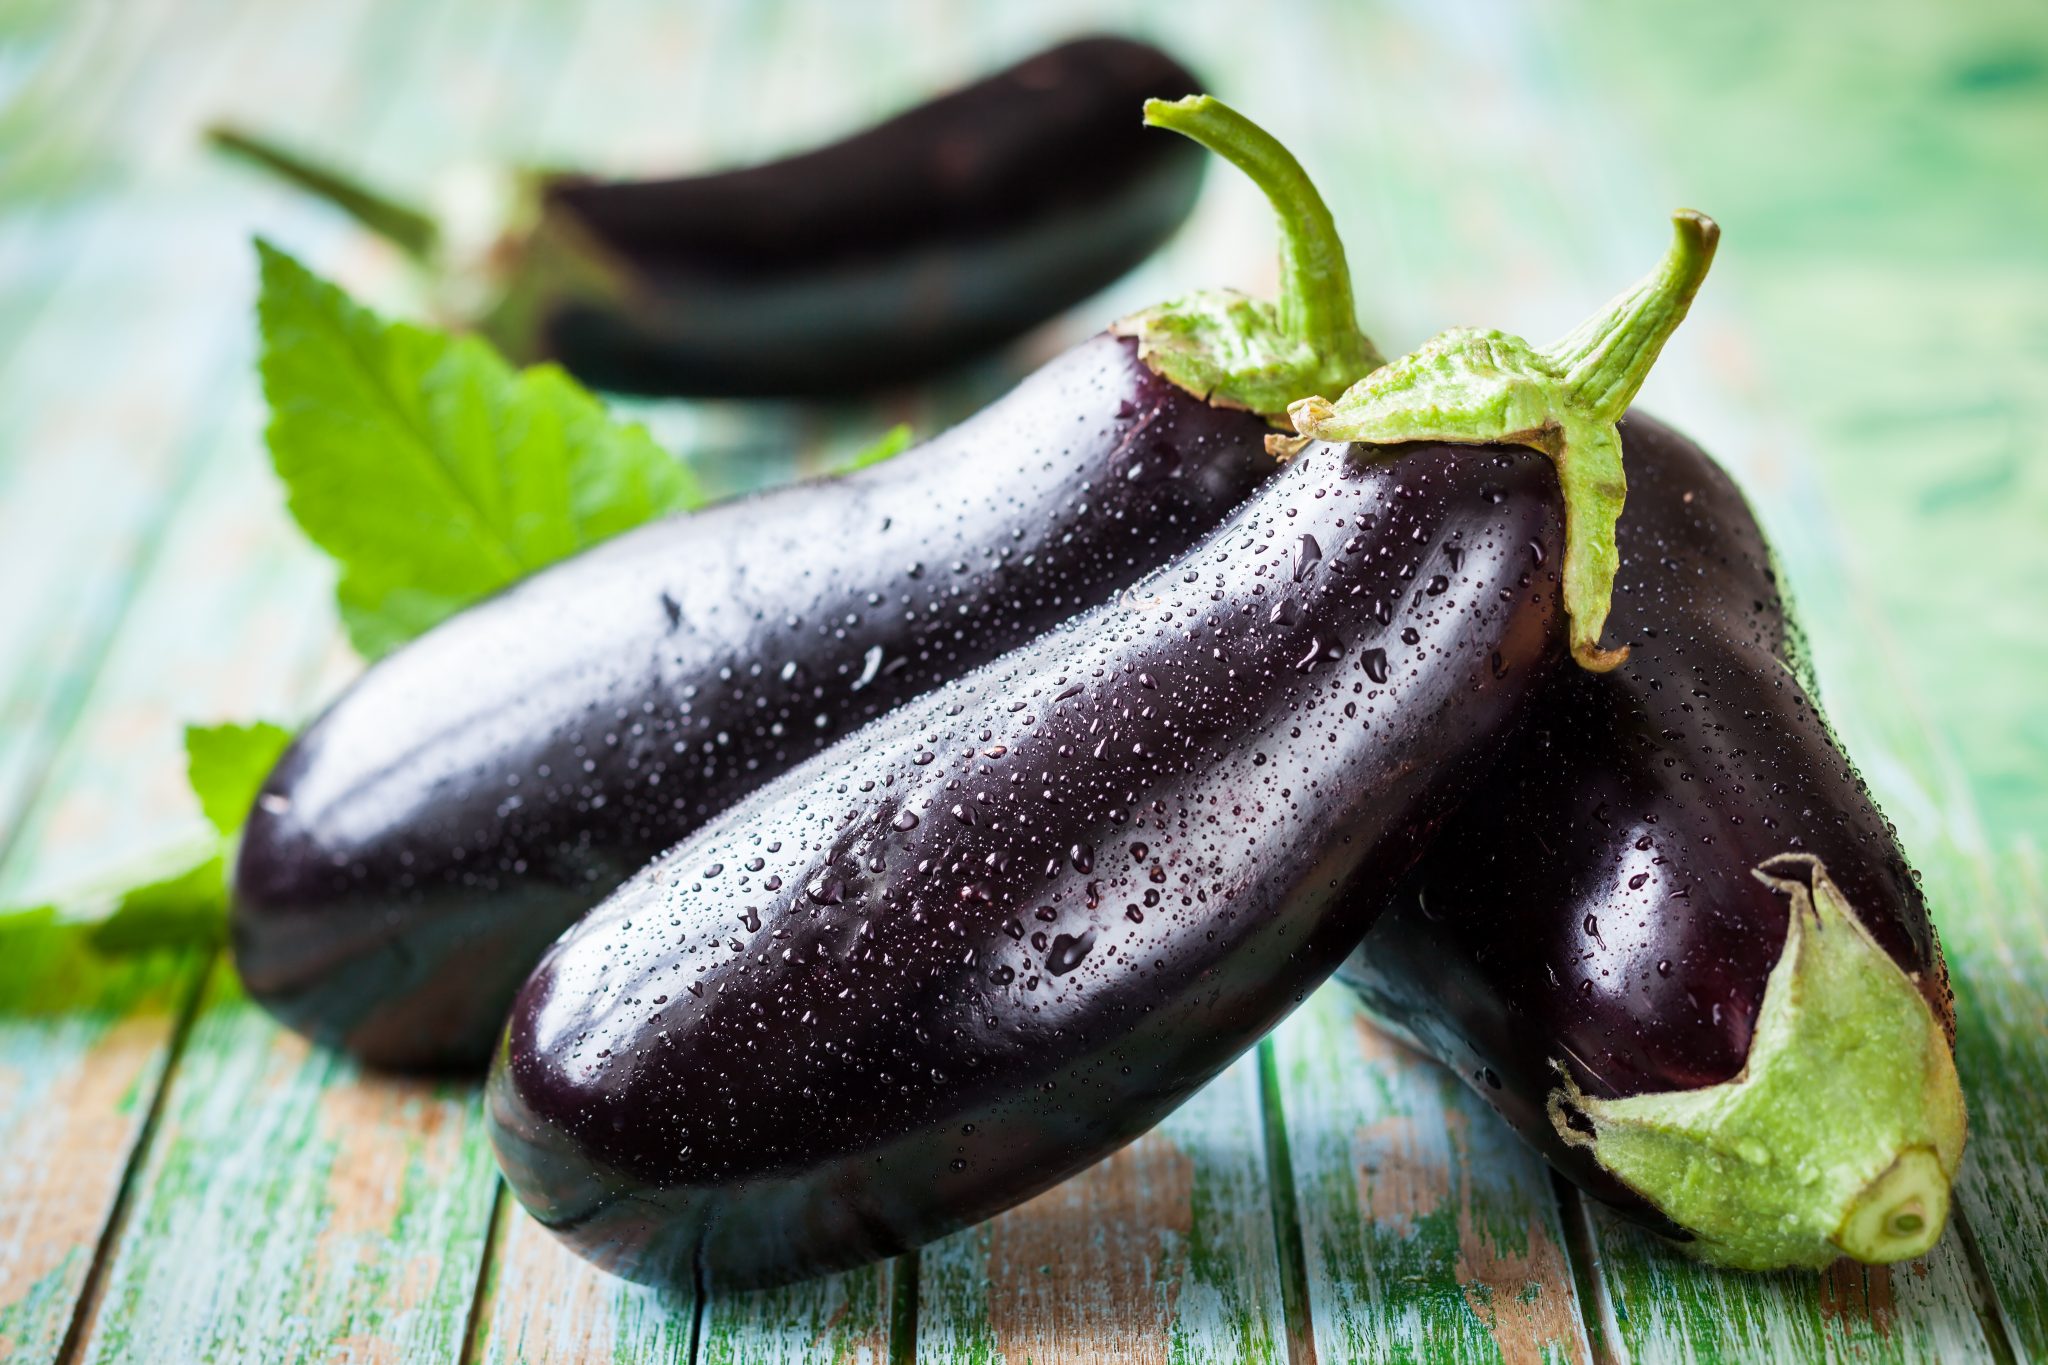 Try these three simply easy eggplant recipes to make eggplants a new family favorite.